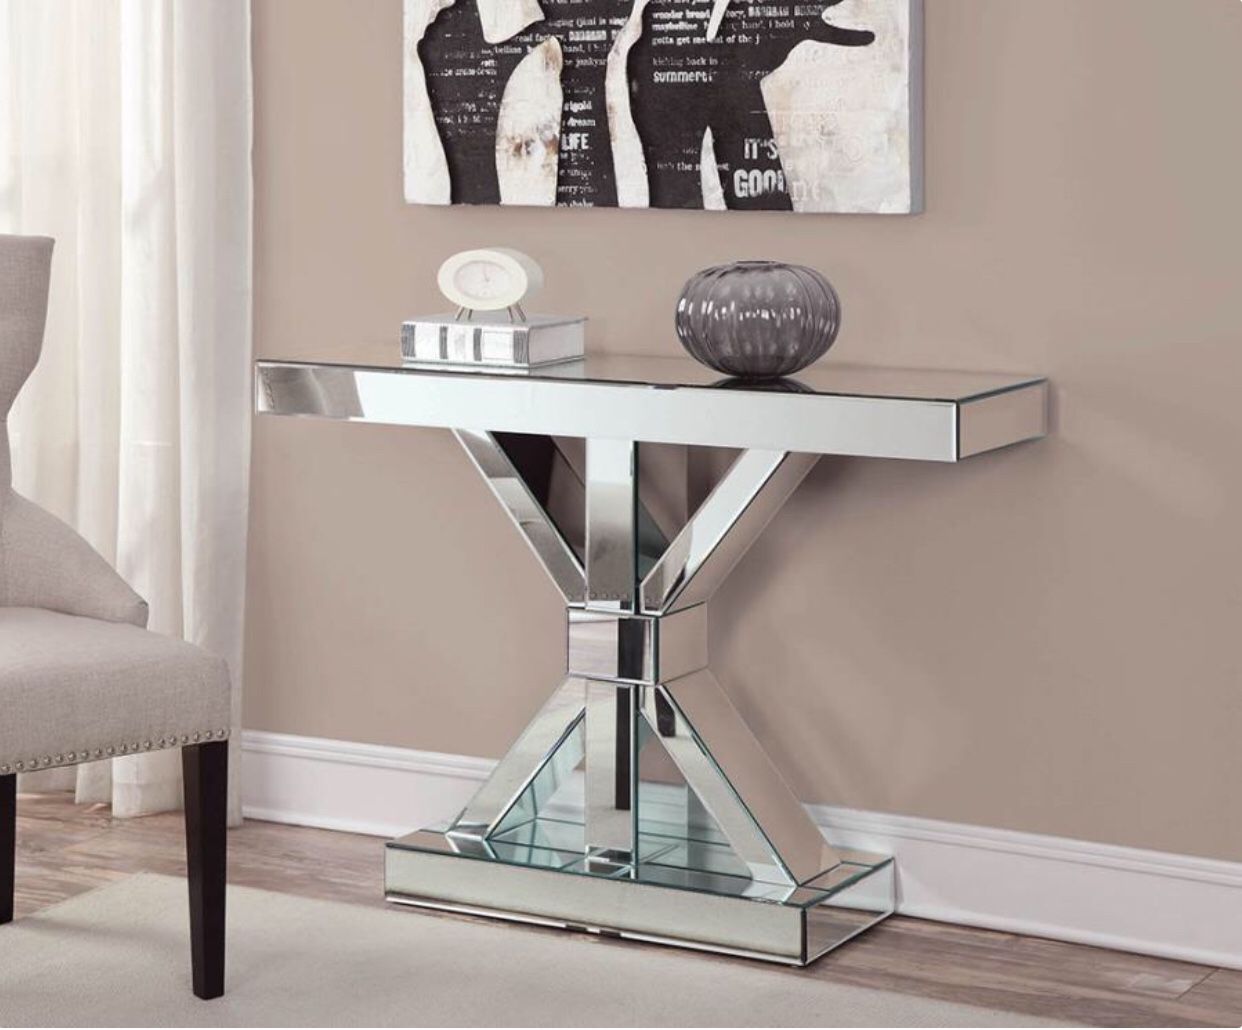 Beautiful Console Table in Offert (930009)